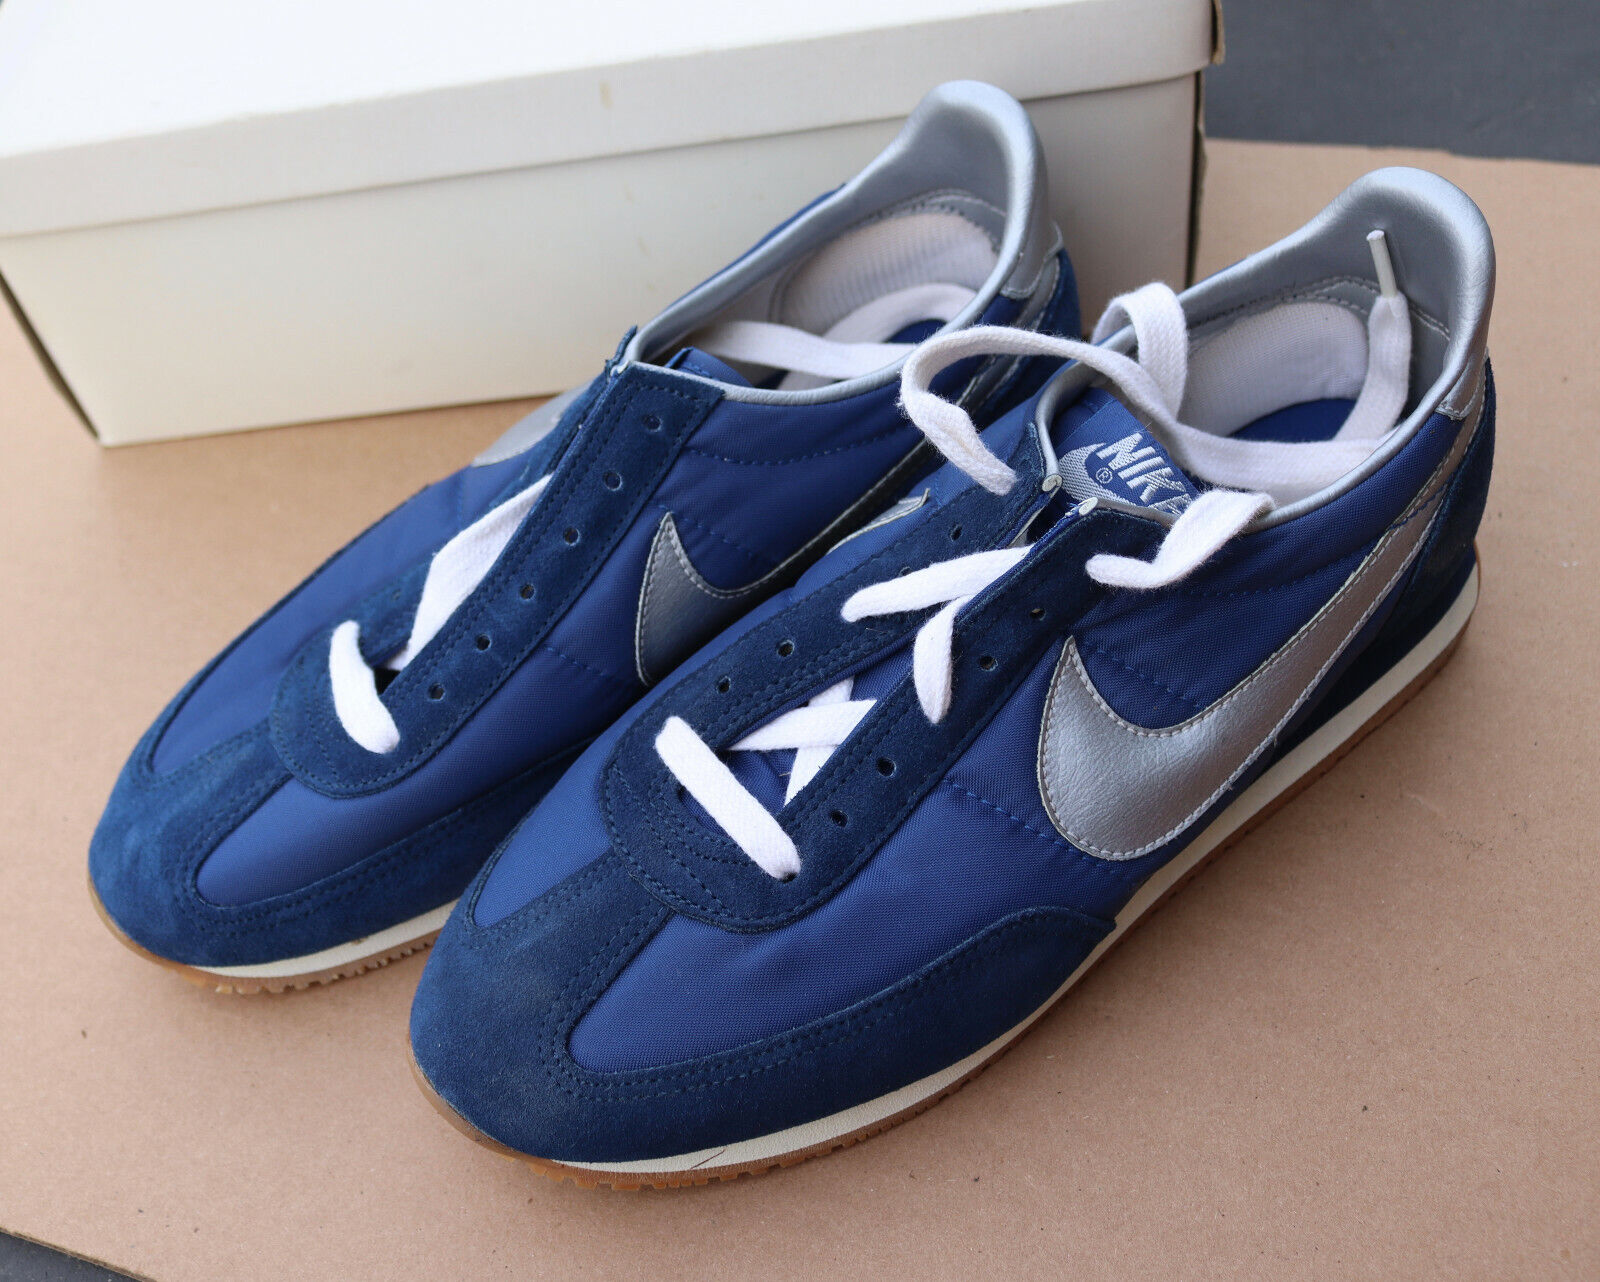 Vintage 1980s NIKE Oceania NB/SIL Blue Silver Running Shoes w/ Box Size 8 RARE |